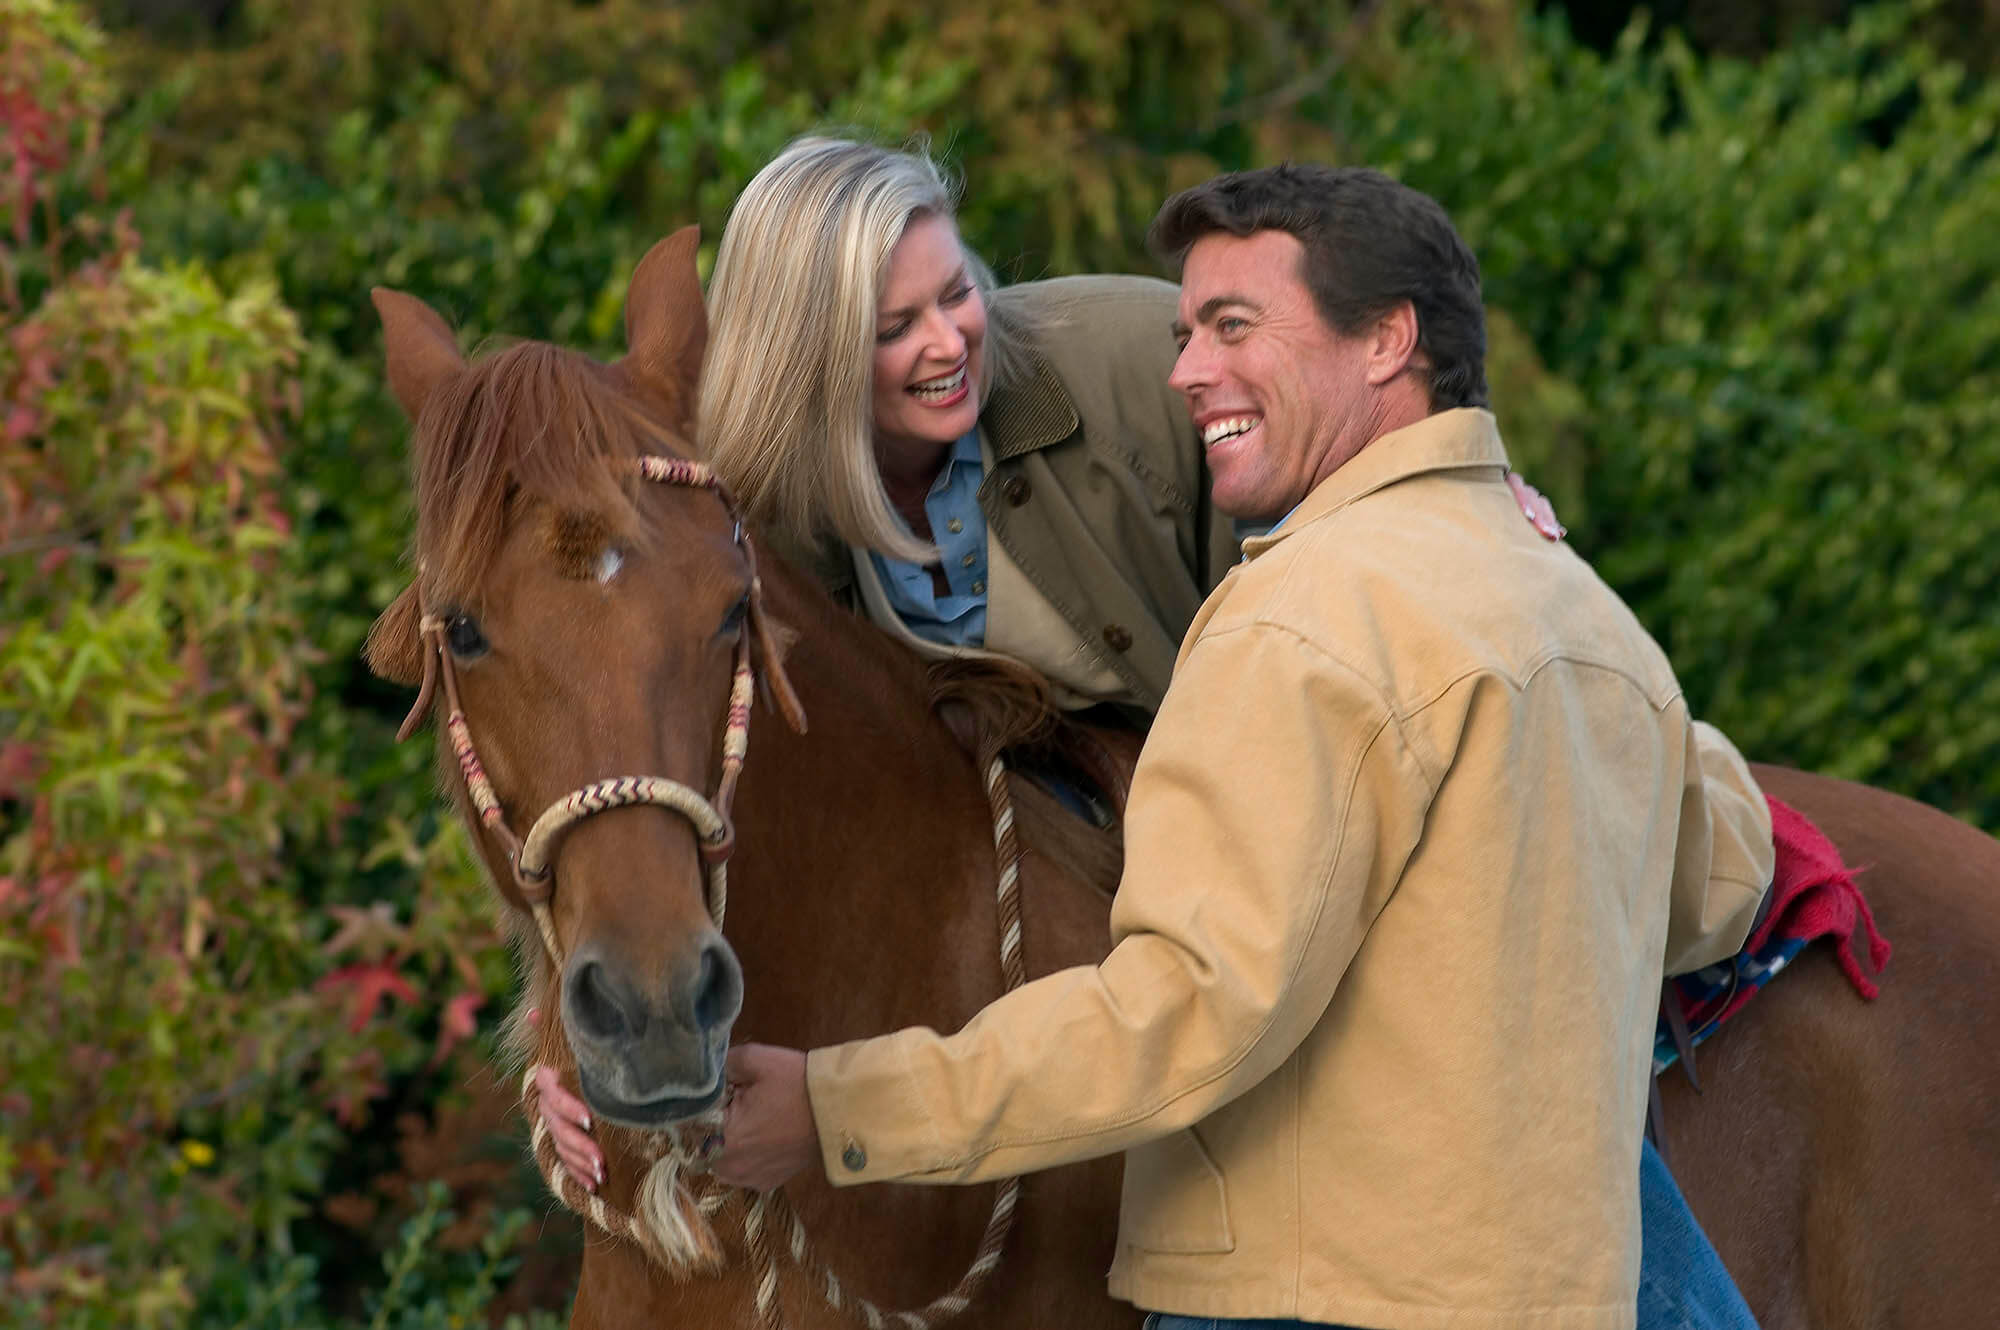 Lifestyle image of a couple enjoying a horse ride. Lifestyle photography by Craig Lovell